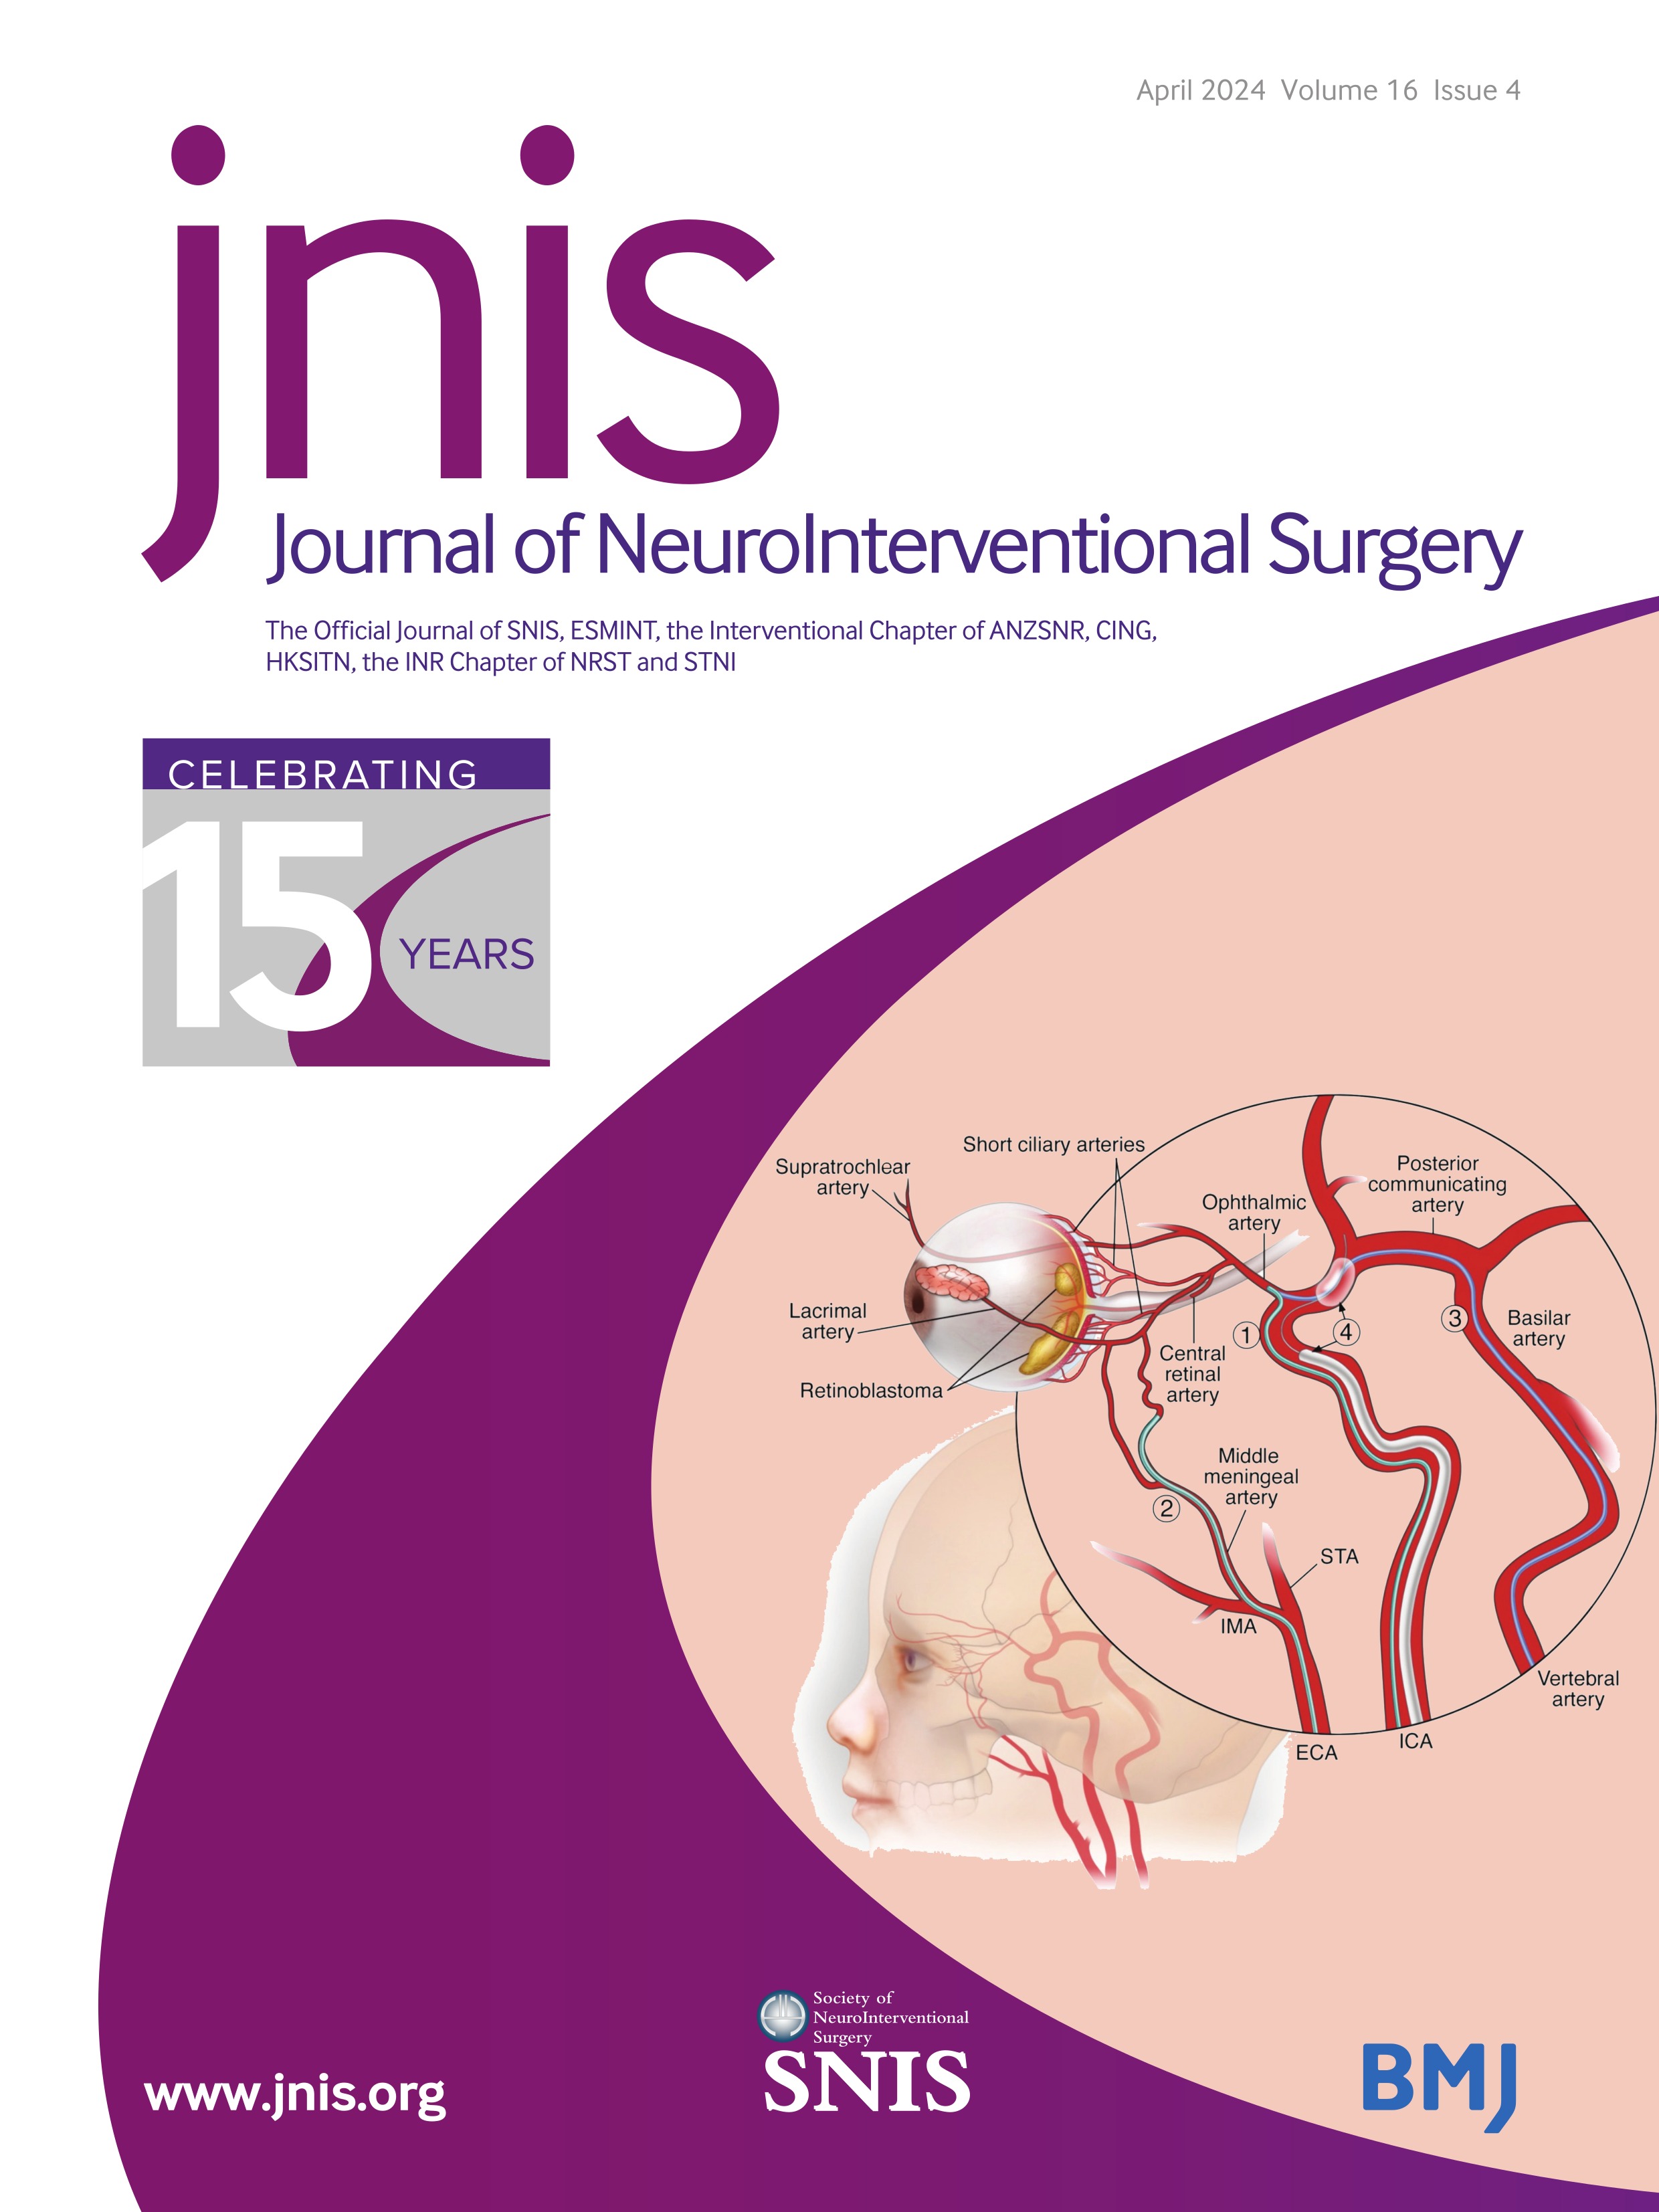 Response to: Correspondence on "Cerebral aneurysms: Germany-wide real-world outcome data of endovascular or neurosurgical treatment from 2007 to 2019" by Cole